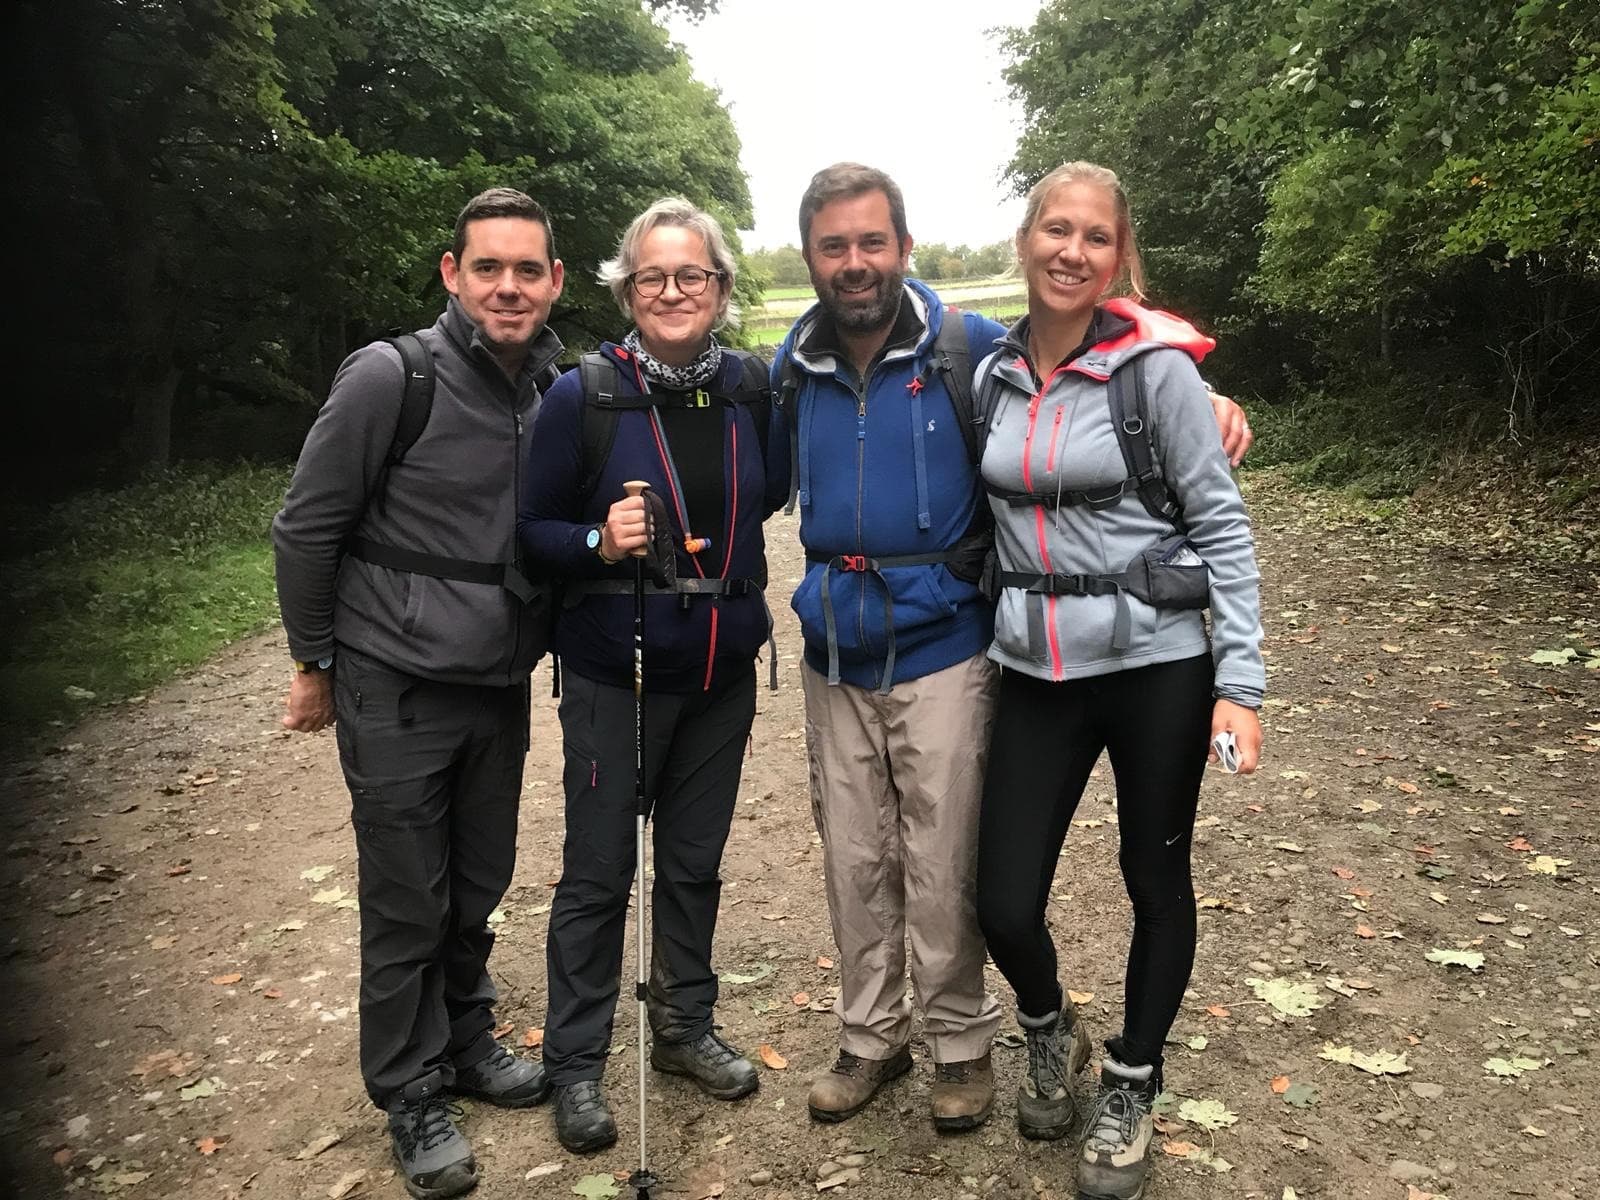 Kings team complete 50km peak district challenge to raise funds for Child Brain Injury Trust